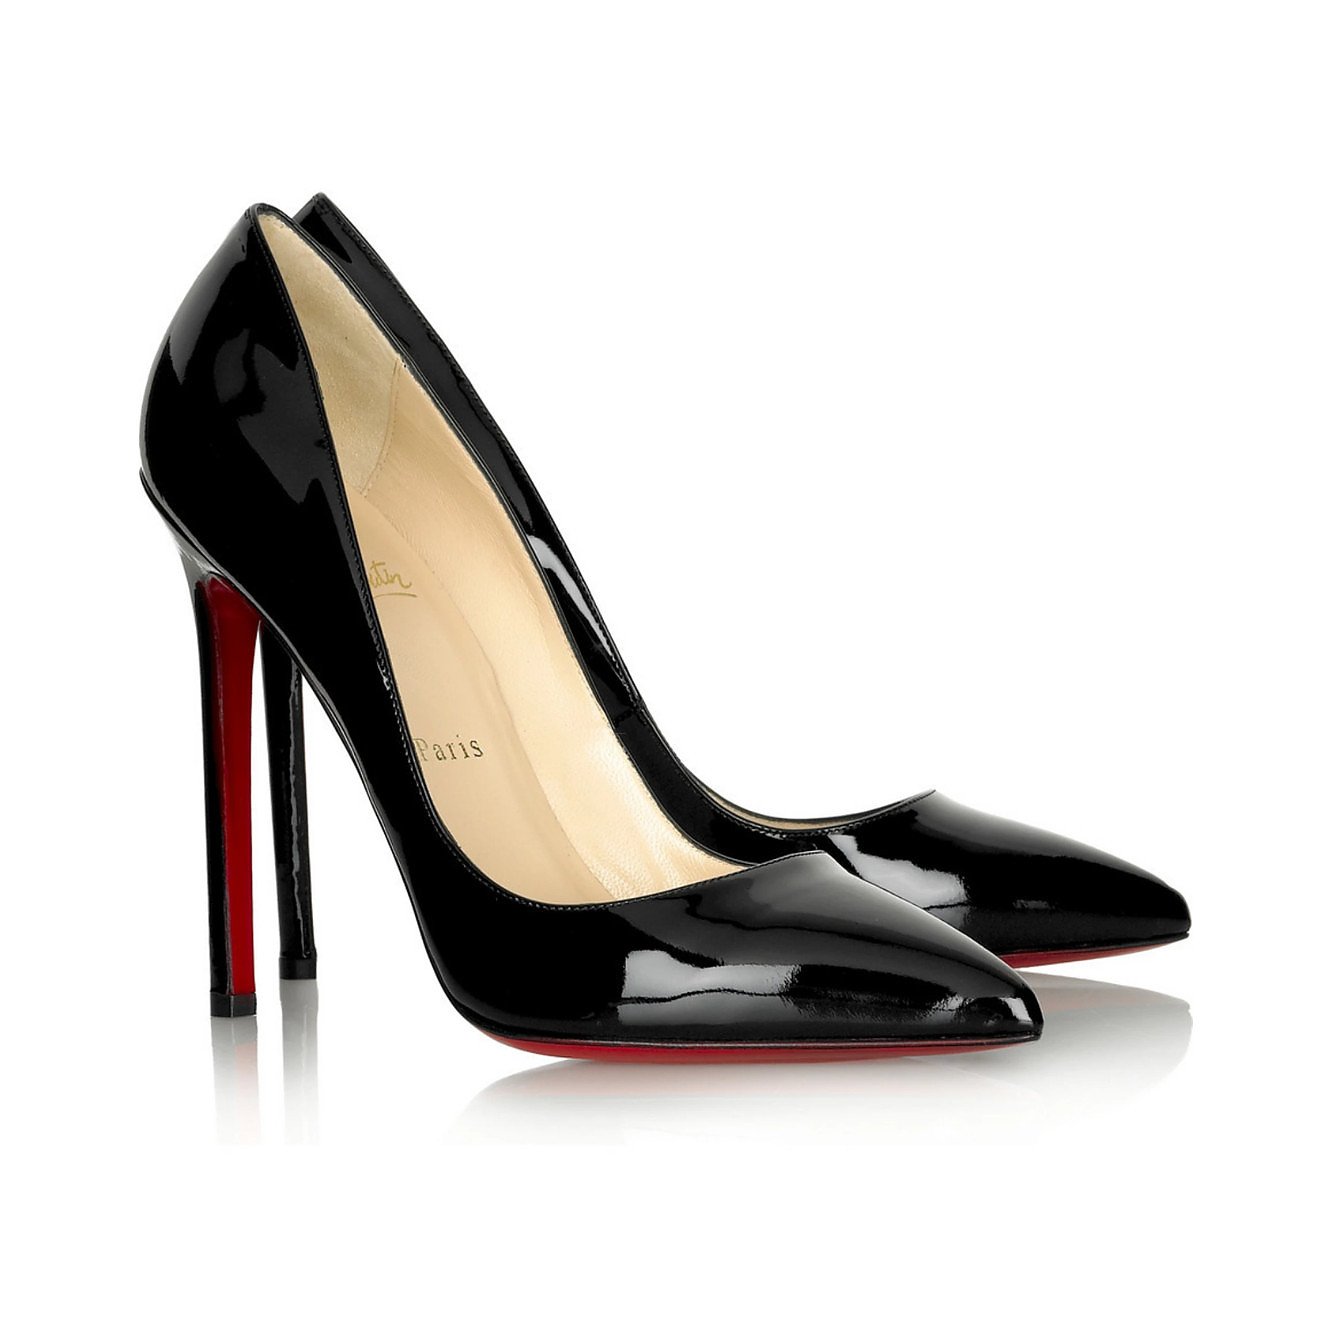 pigalle 120 louboutin